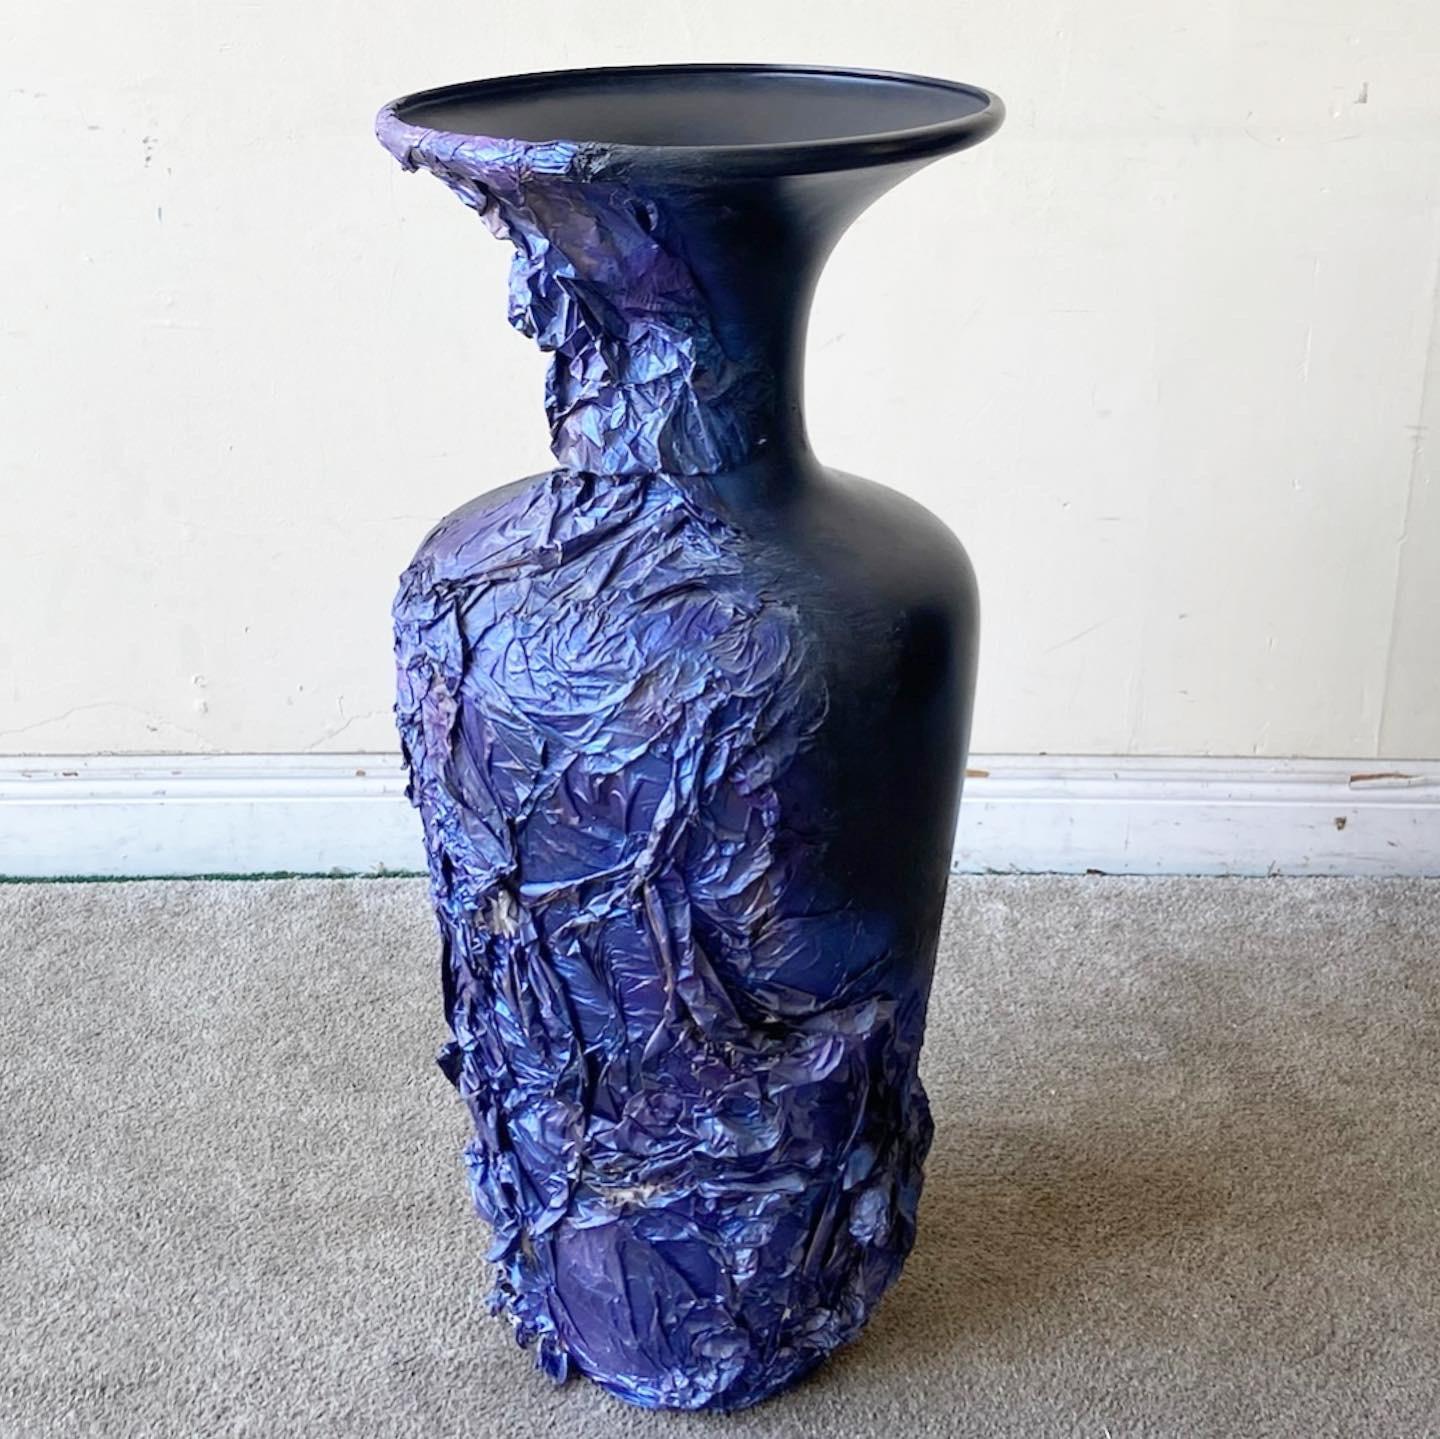 Exceptional postmodern floor vase. Features a black finish with a blue and purple paper mache around the side.
